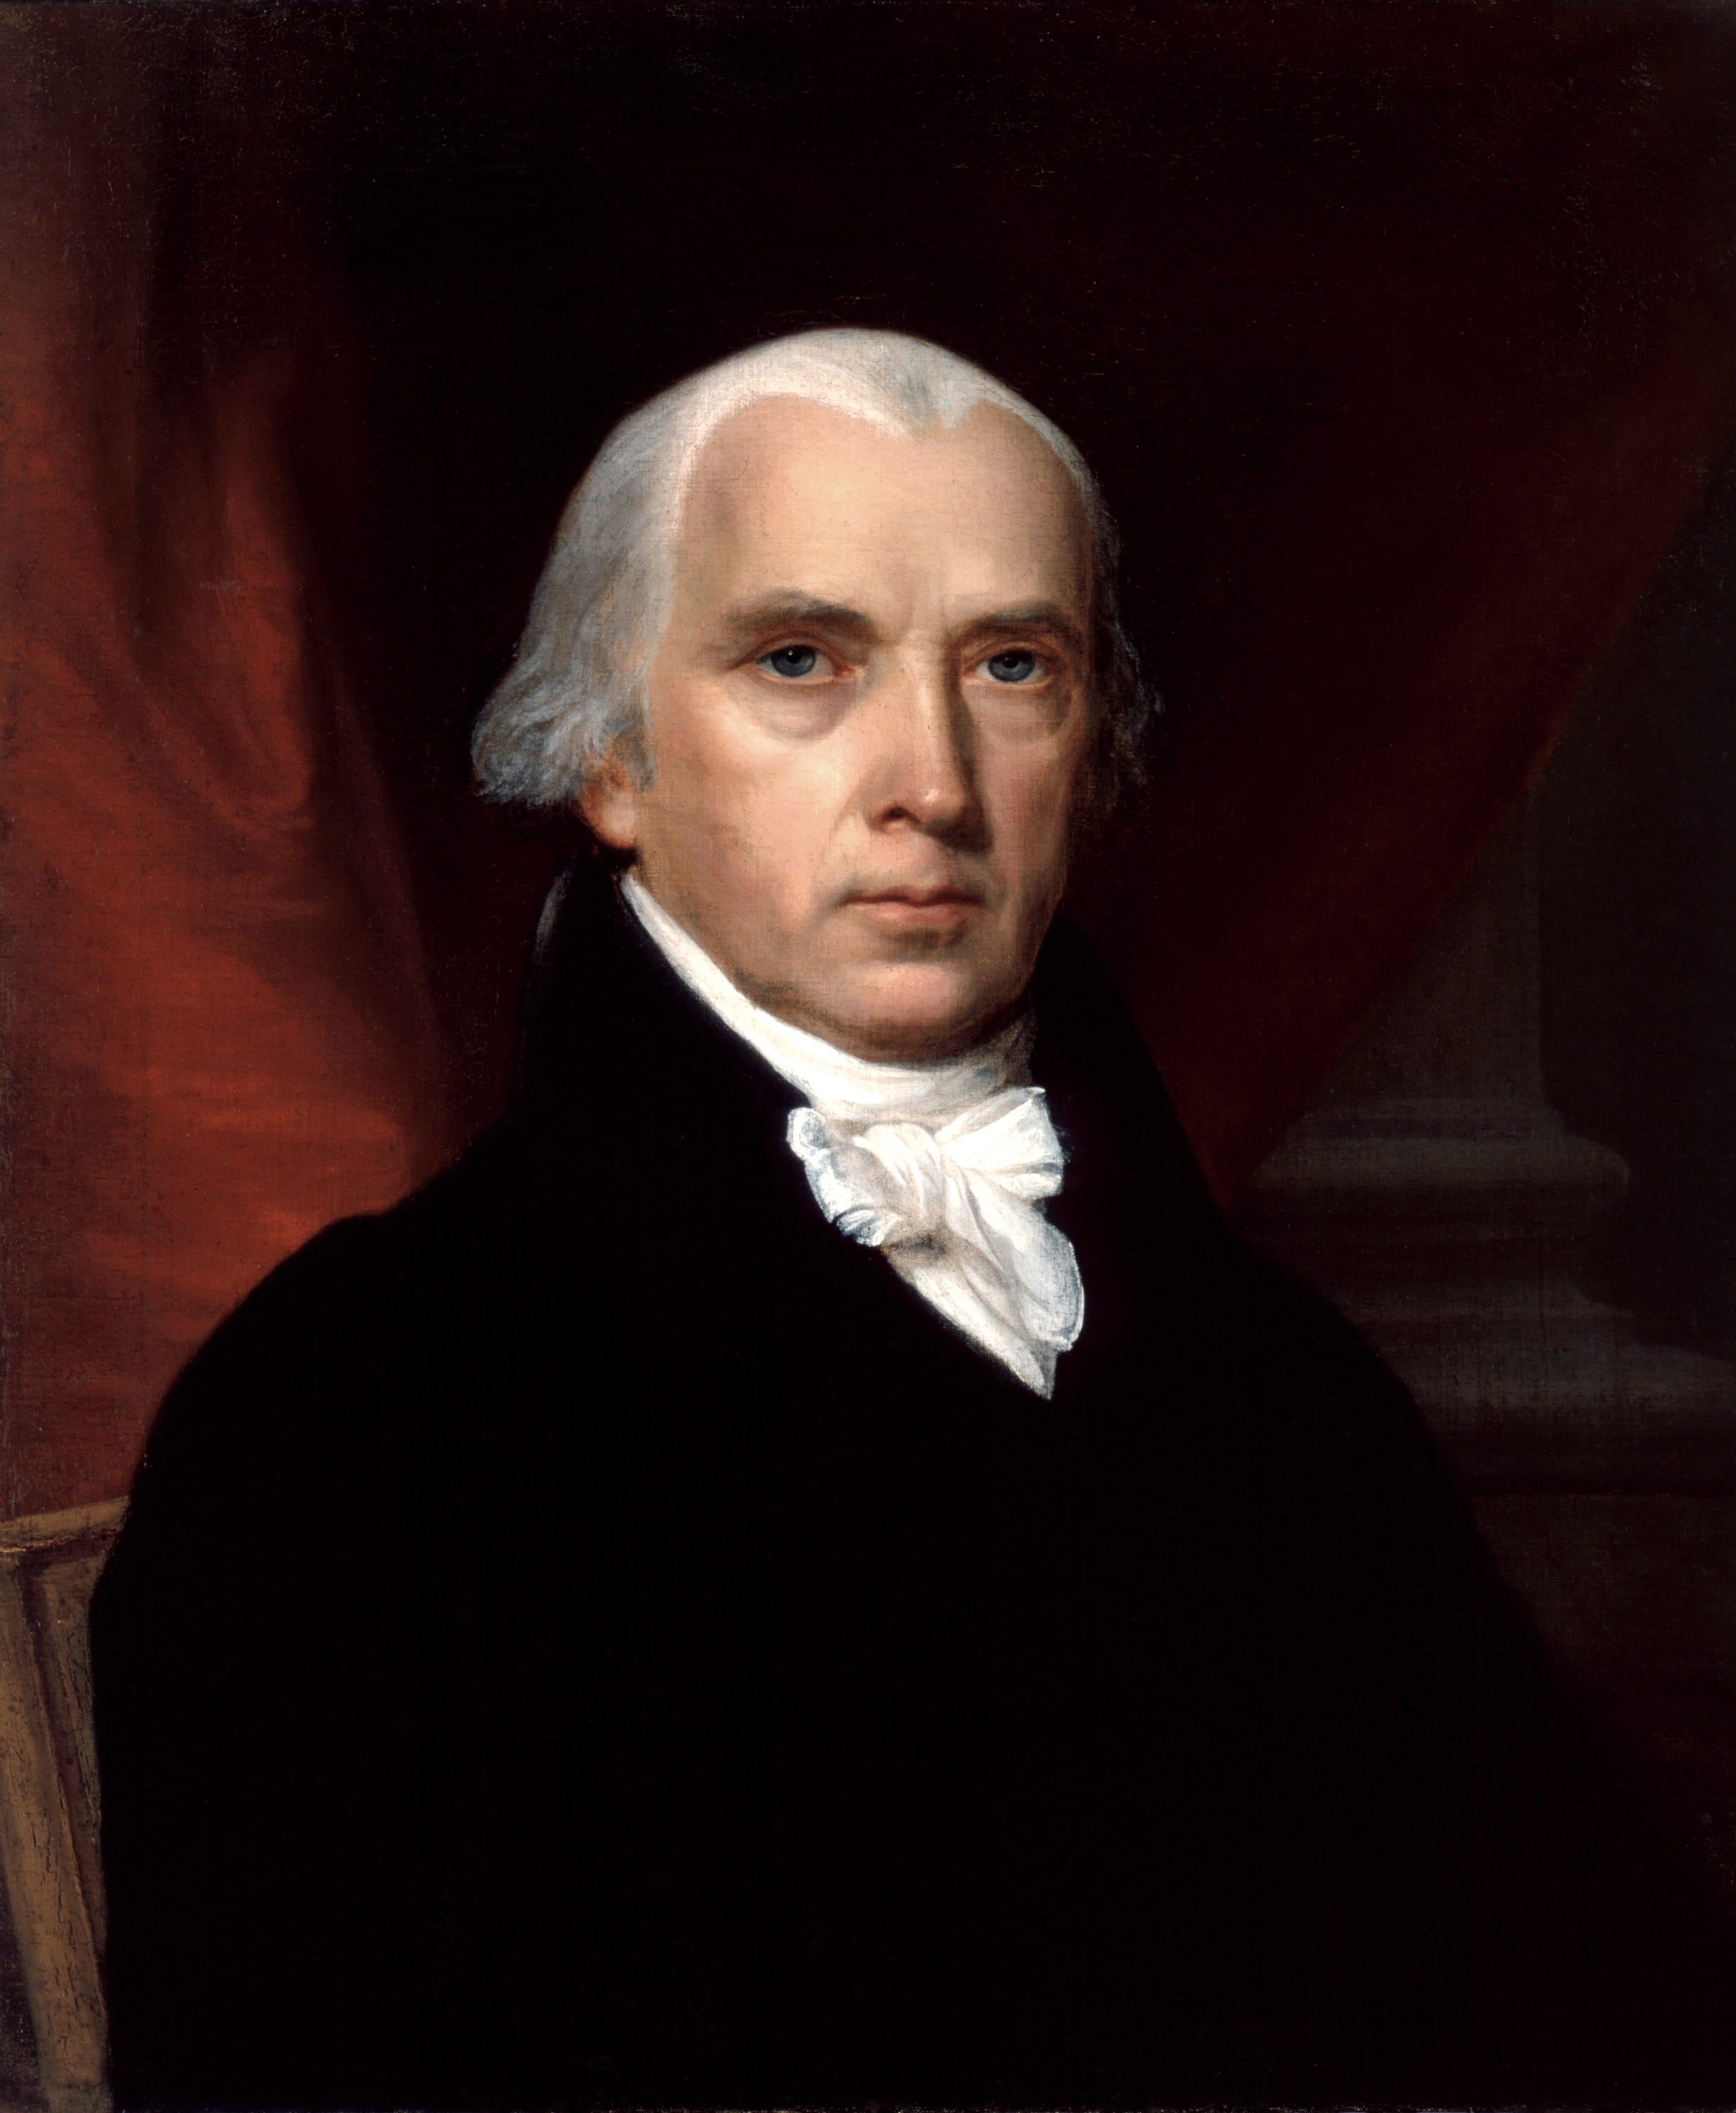 James Madison Portrait, federalist papers, founding father, president